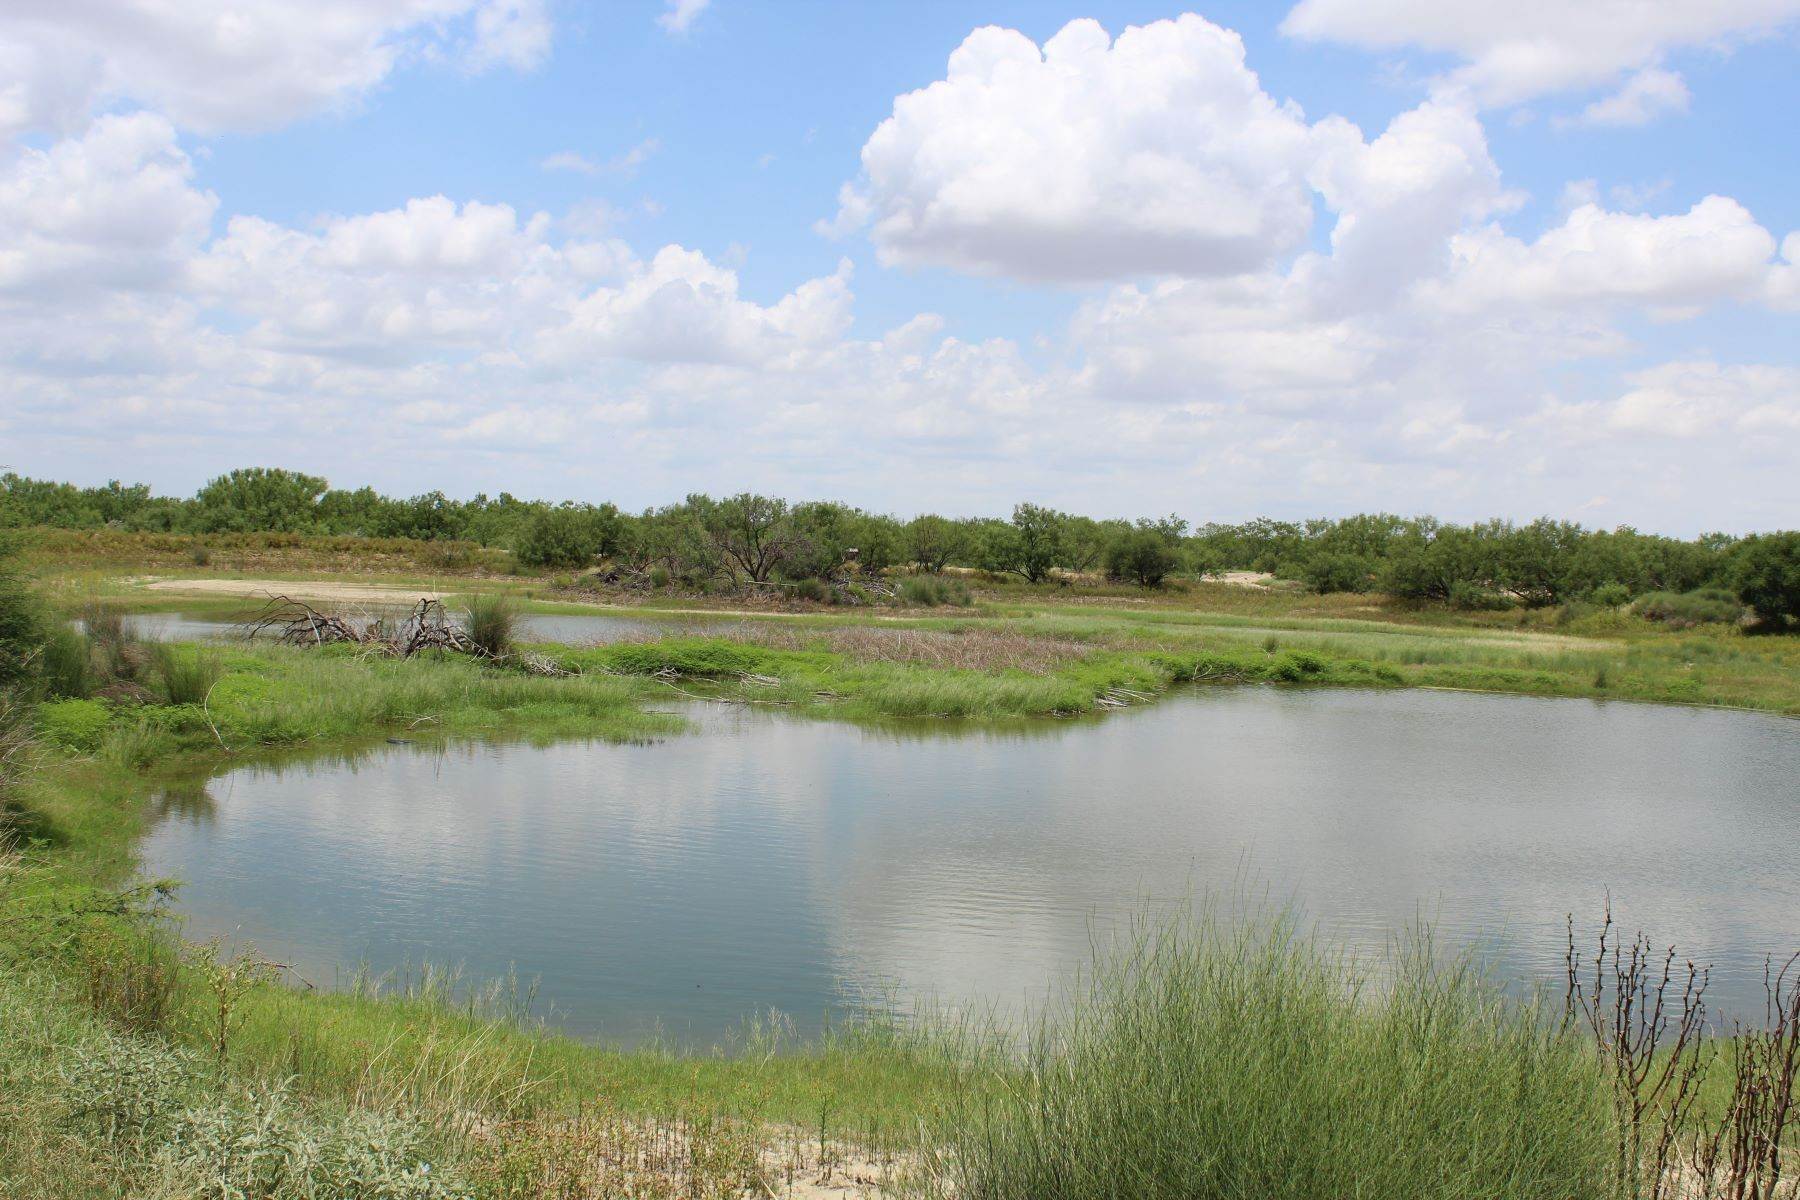 Farm and Ranch Properties for Sale at 1,050+/- Acres Le River Ranch, Maverick County , El Indio , TX 78860 1,050+/- Acres Le River Ranch, Maverick County, 27702 FM 1021 El Indio, Texas 78860 United States